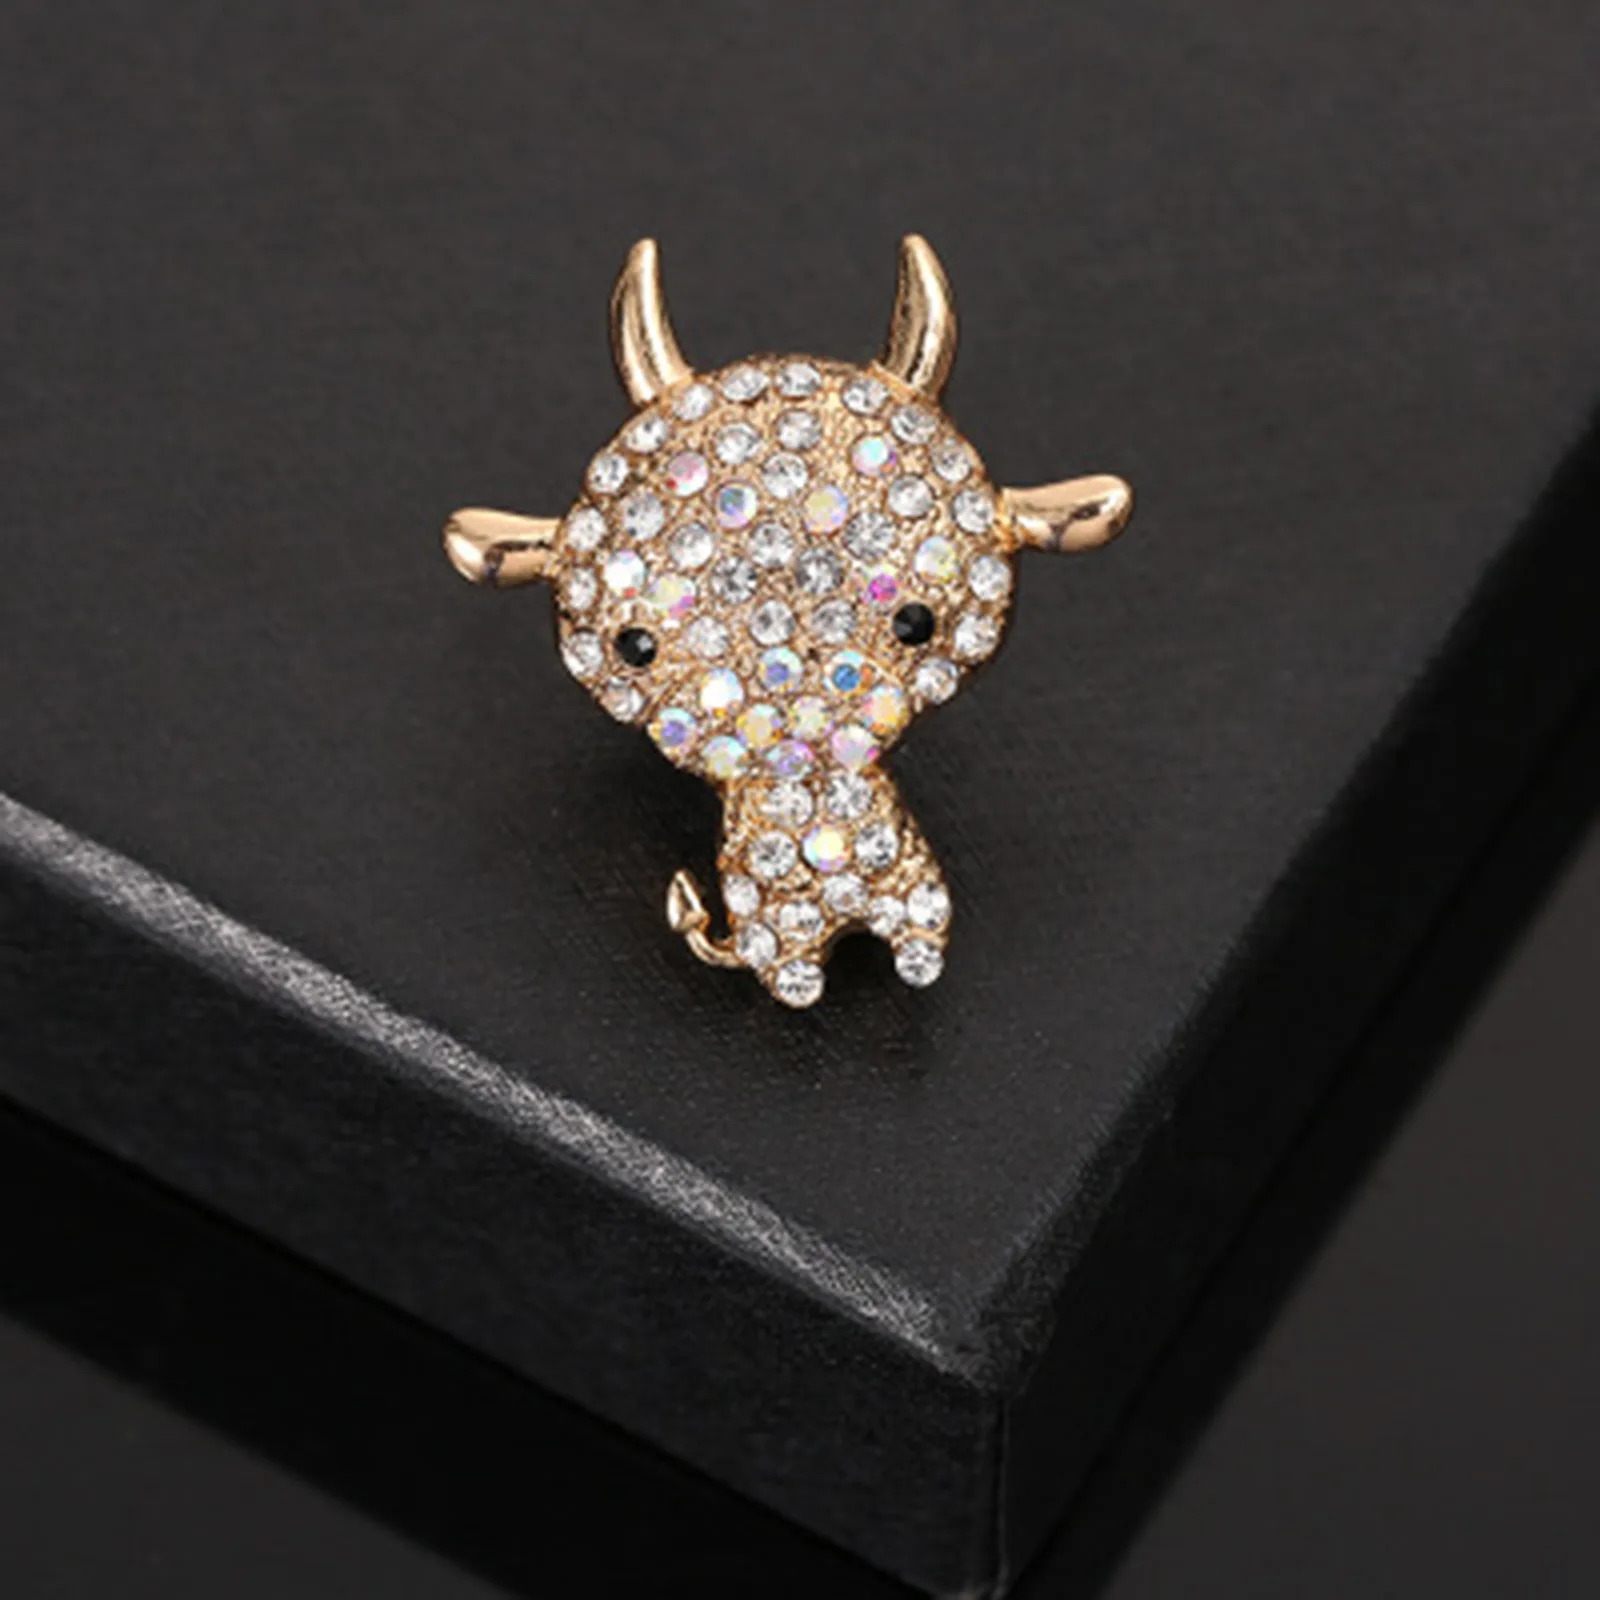 

New Cow Pin Brooches Animal Series Zinc Alloy Gold Color Clear Rhinestone Brooch Women Girl Party Club Jewelry 35mm, 1 Piece